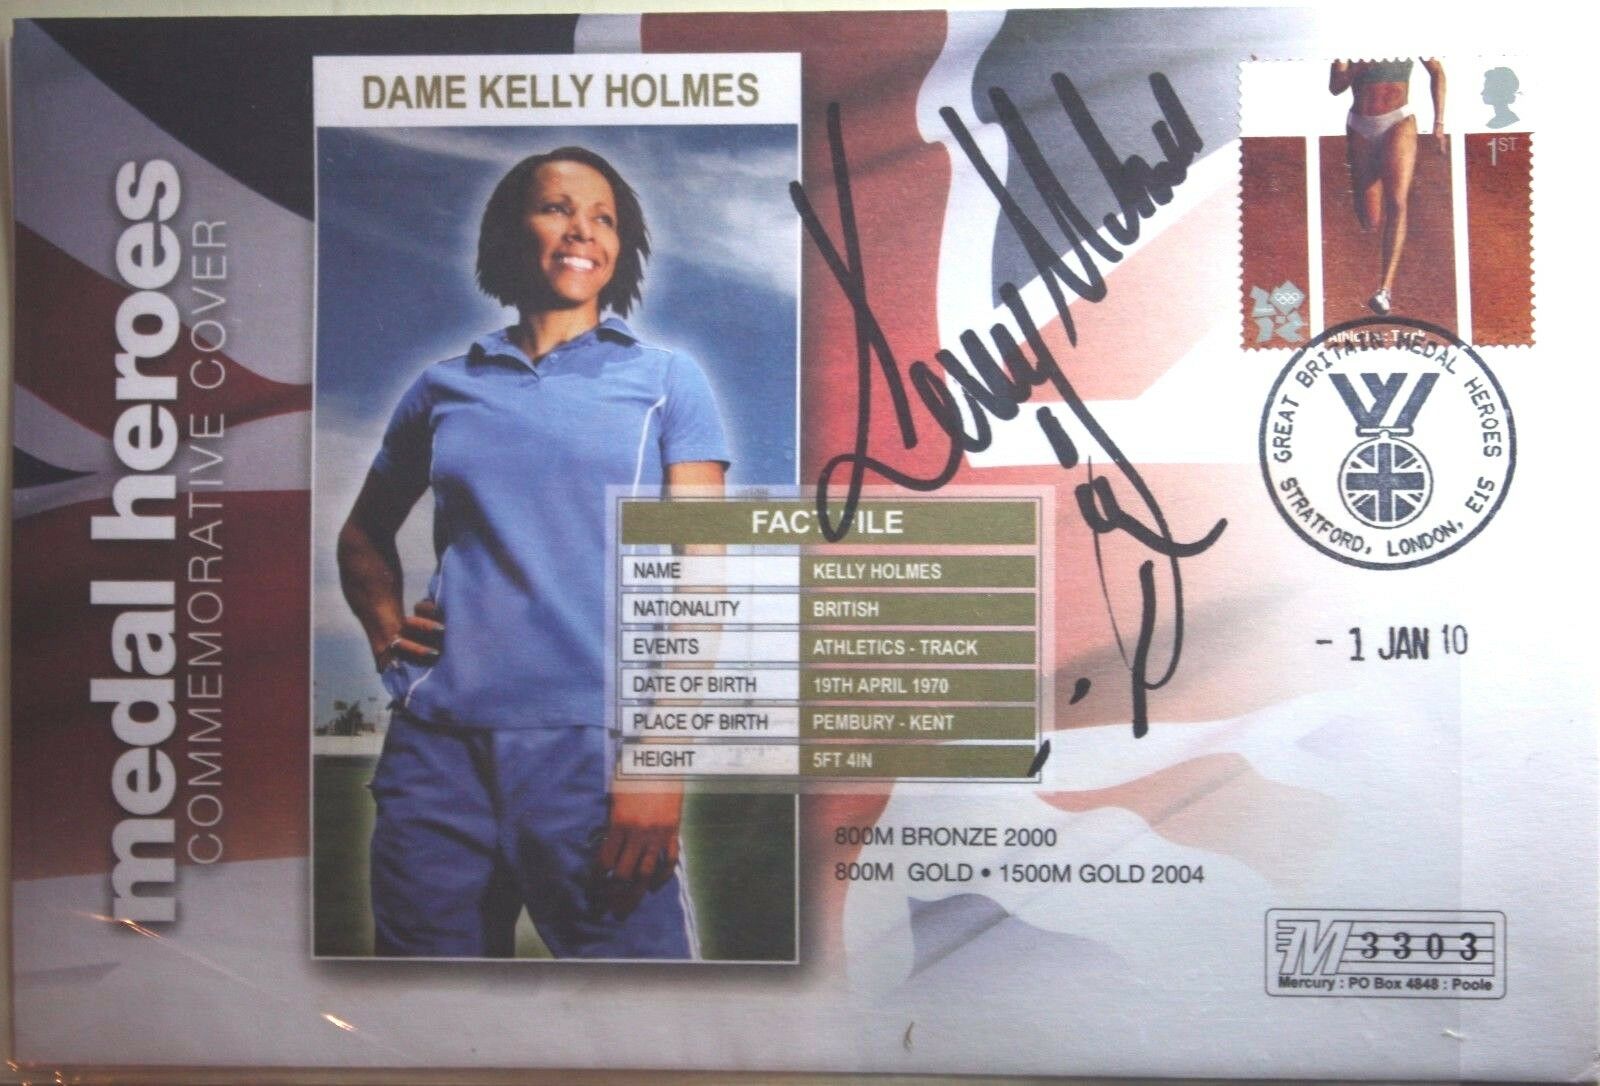 2010 Dame Kelly Holmes Commemorative Cover